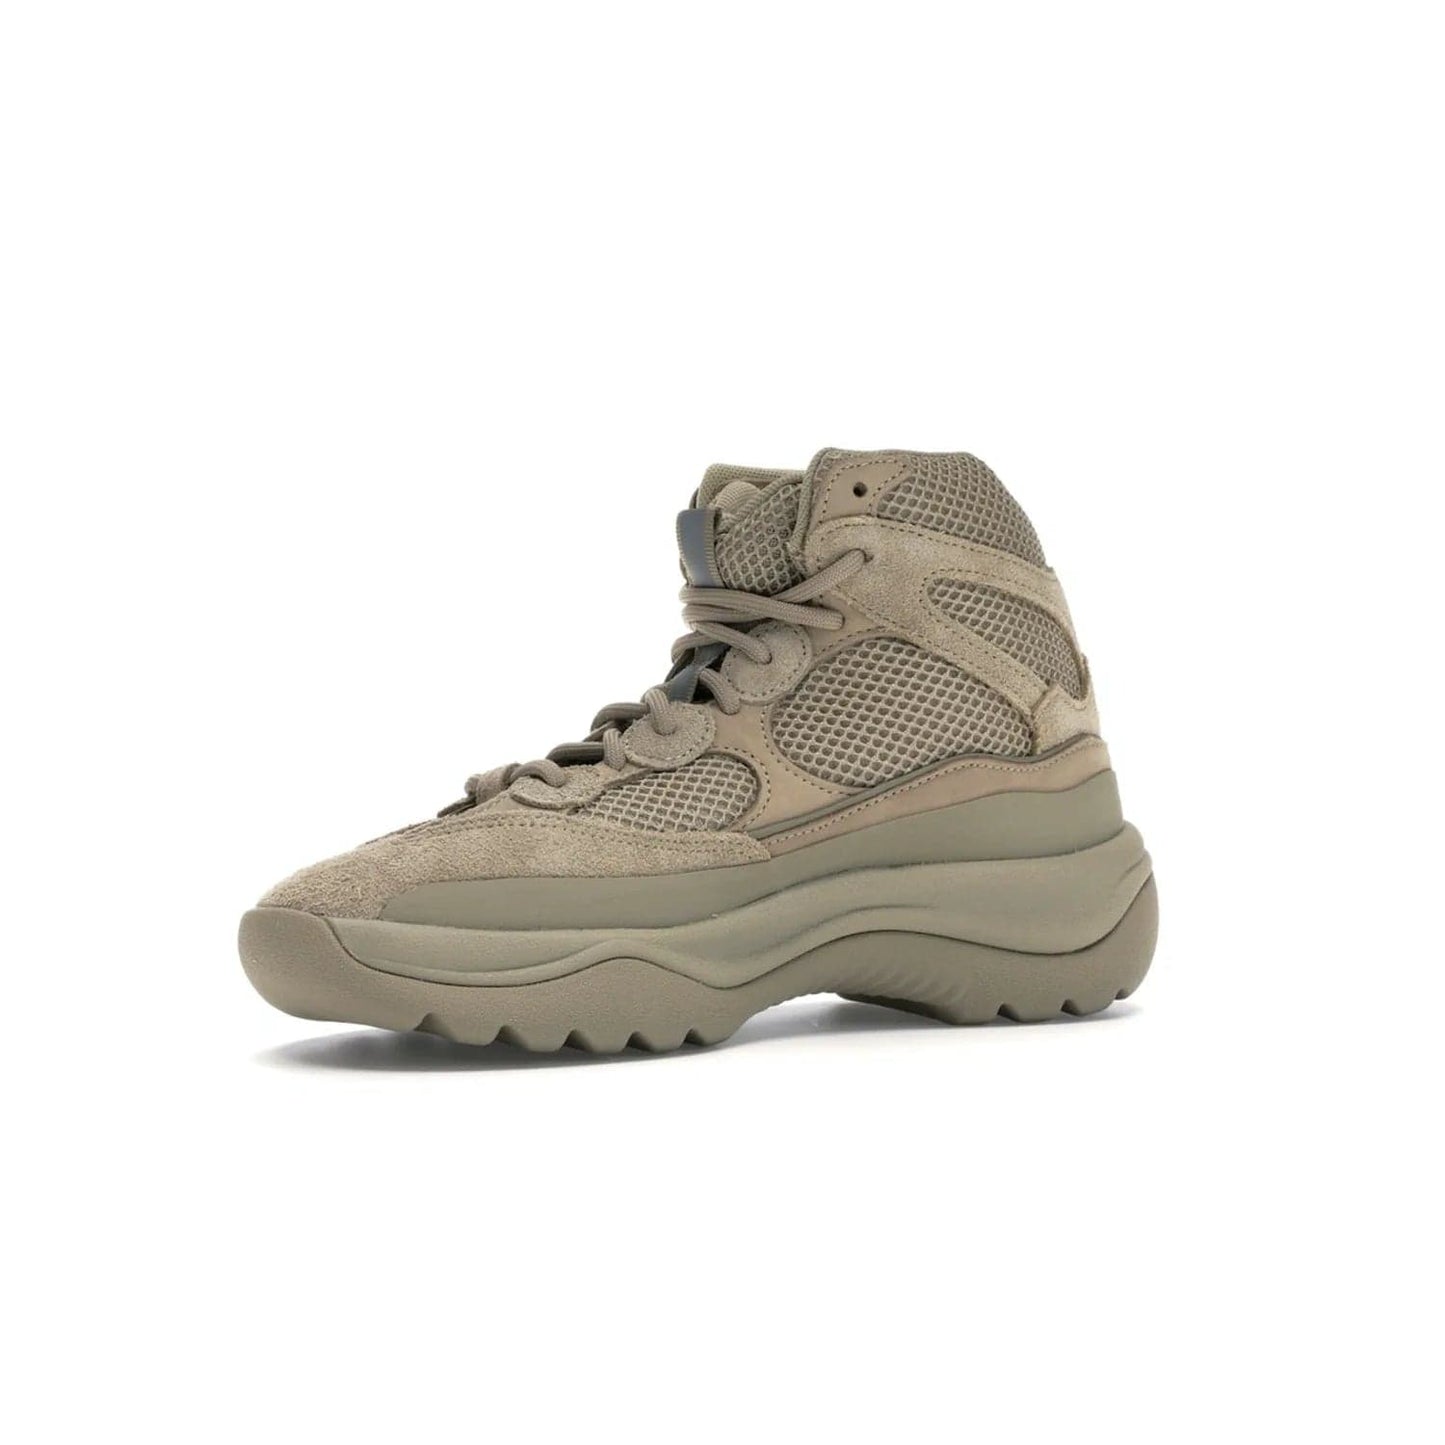 adidas Yeezy Desert Boot Rock - Image 16 - Only at www.BallersClubKickz.com - #
This season, make a fashion statement with the adidas Yeezy Desert Boot Rock. Nubuck and suede upper offers tonal style while the grooved sole provides traction and stability. Get yours in April 2019.